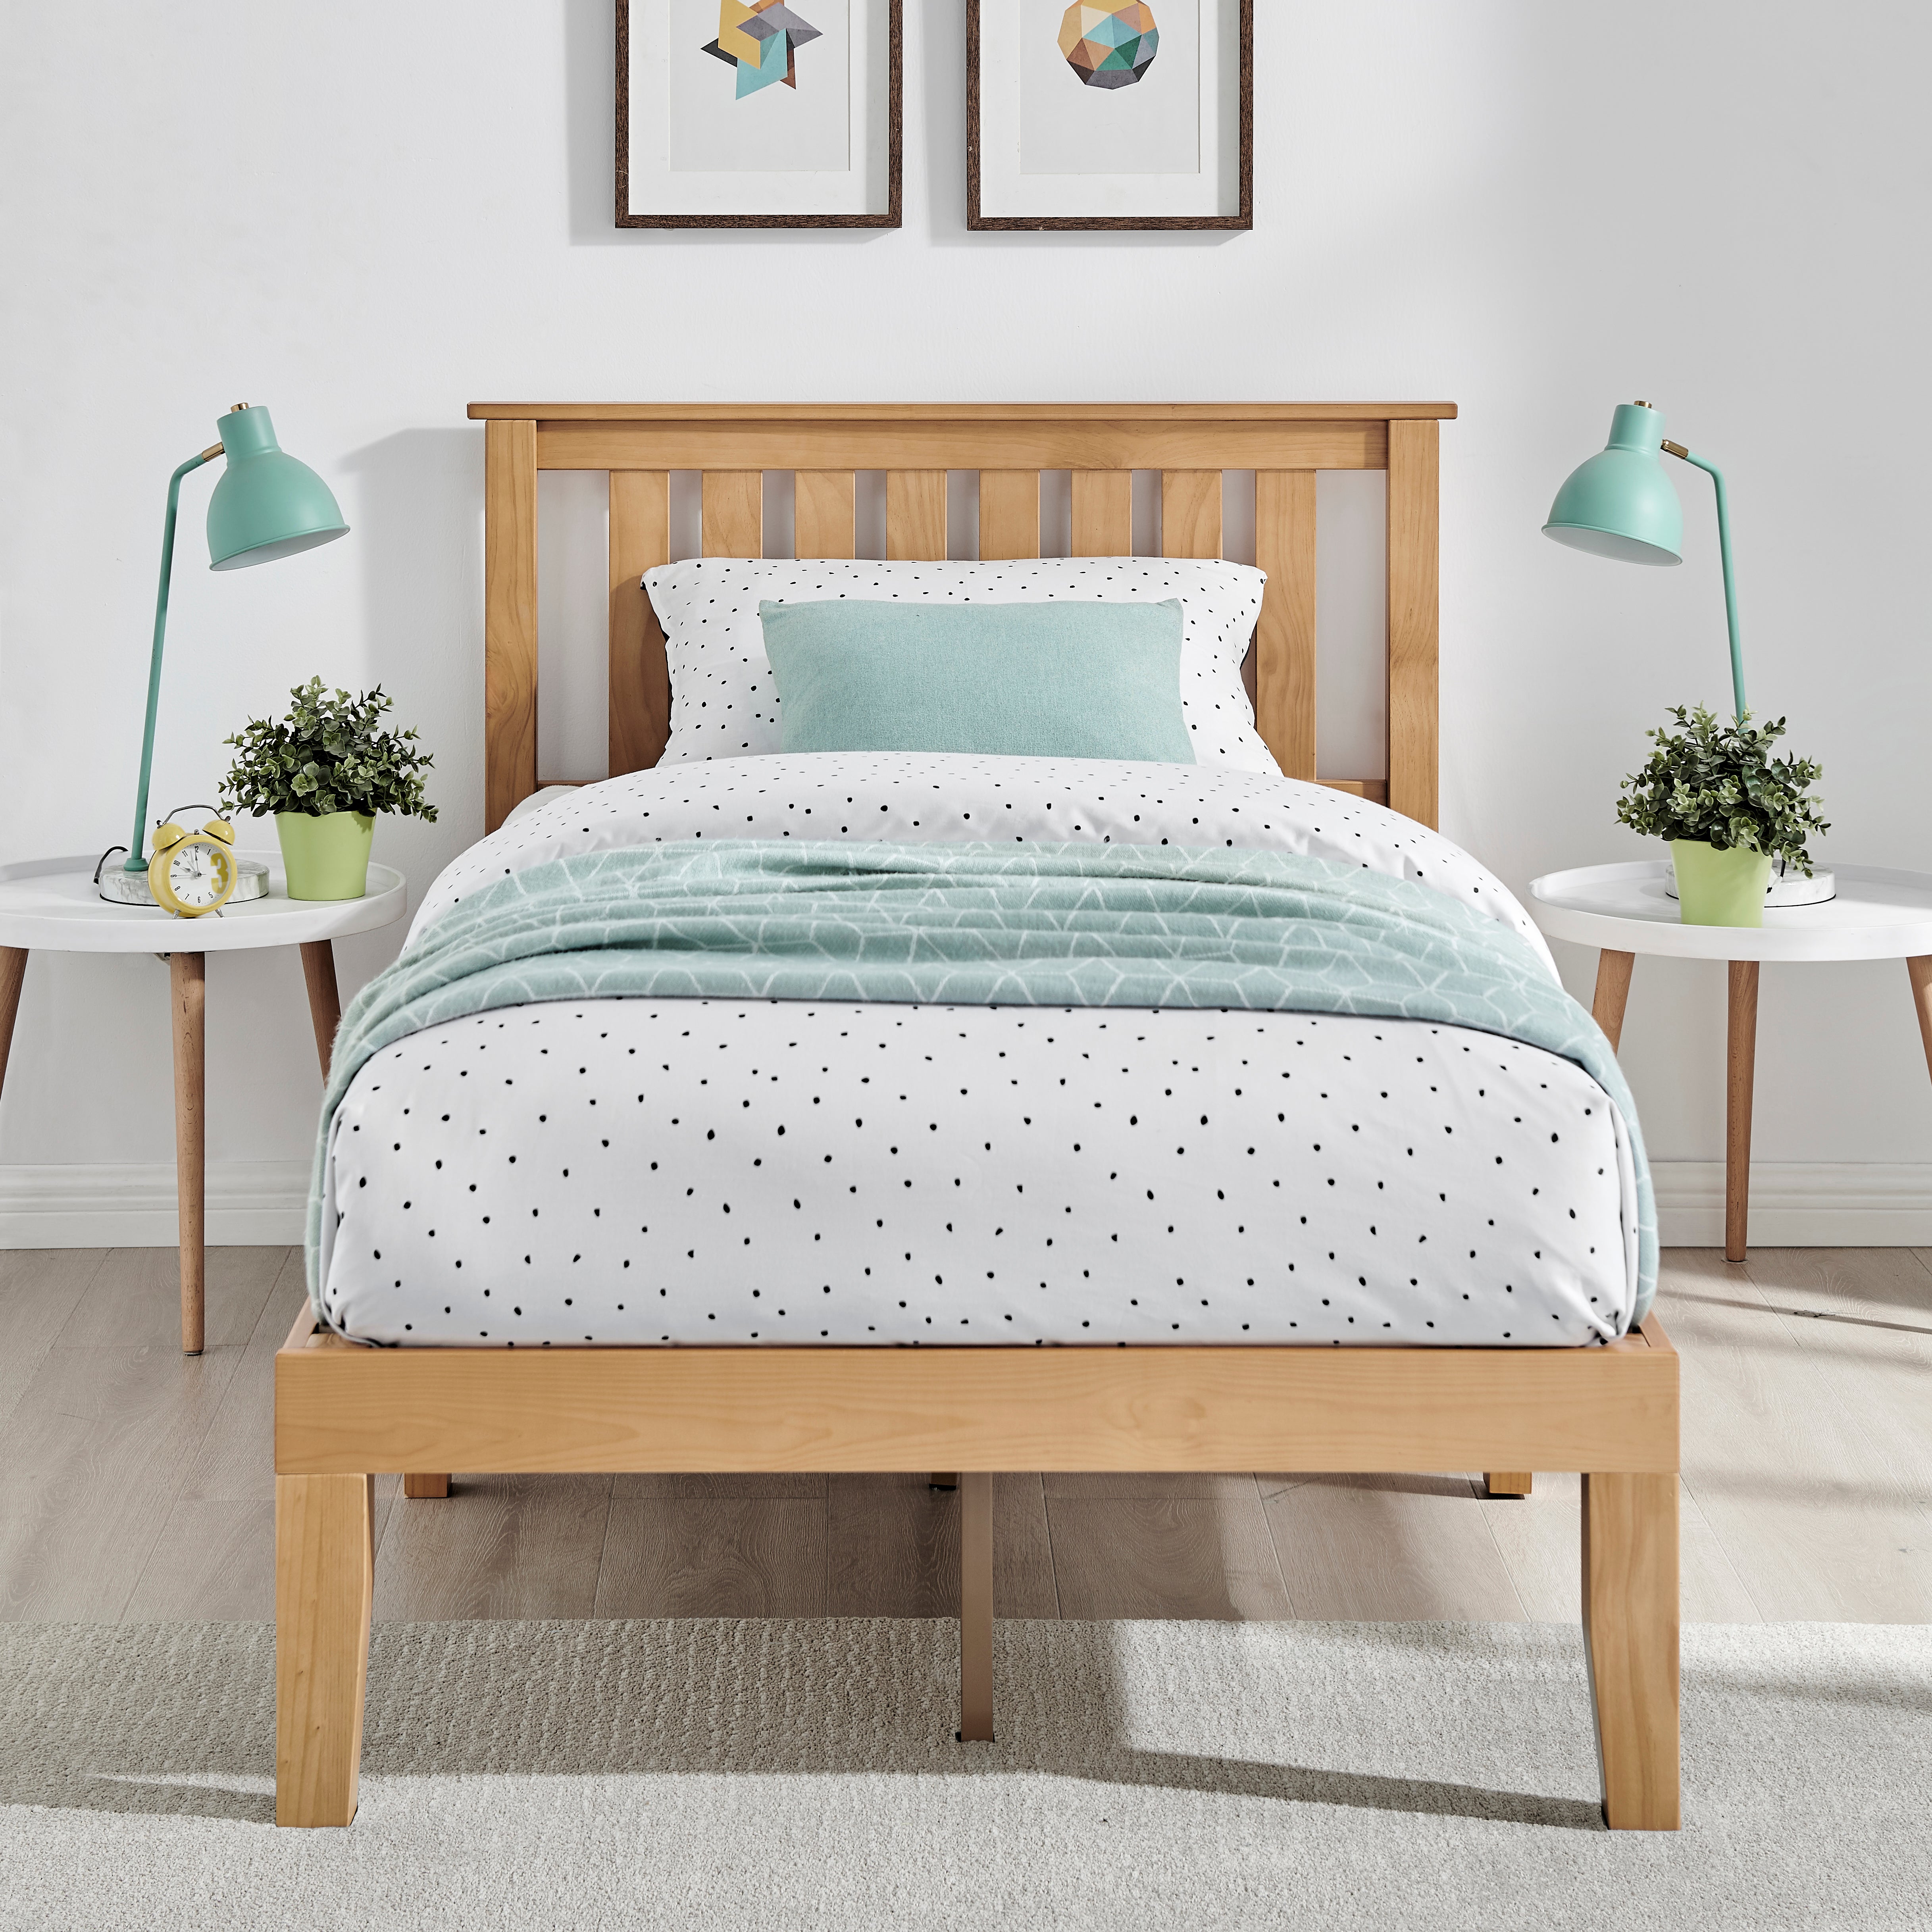 DukeLiving Bronte Solid Wood Platform Bed With Headboard Natural (King Single)